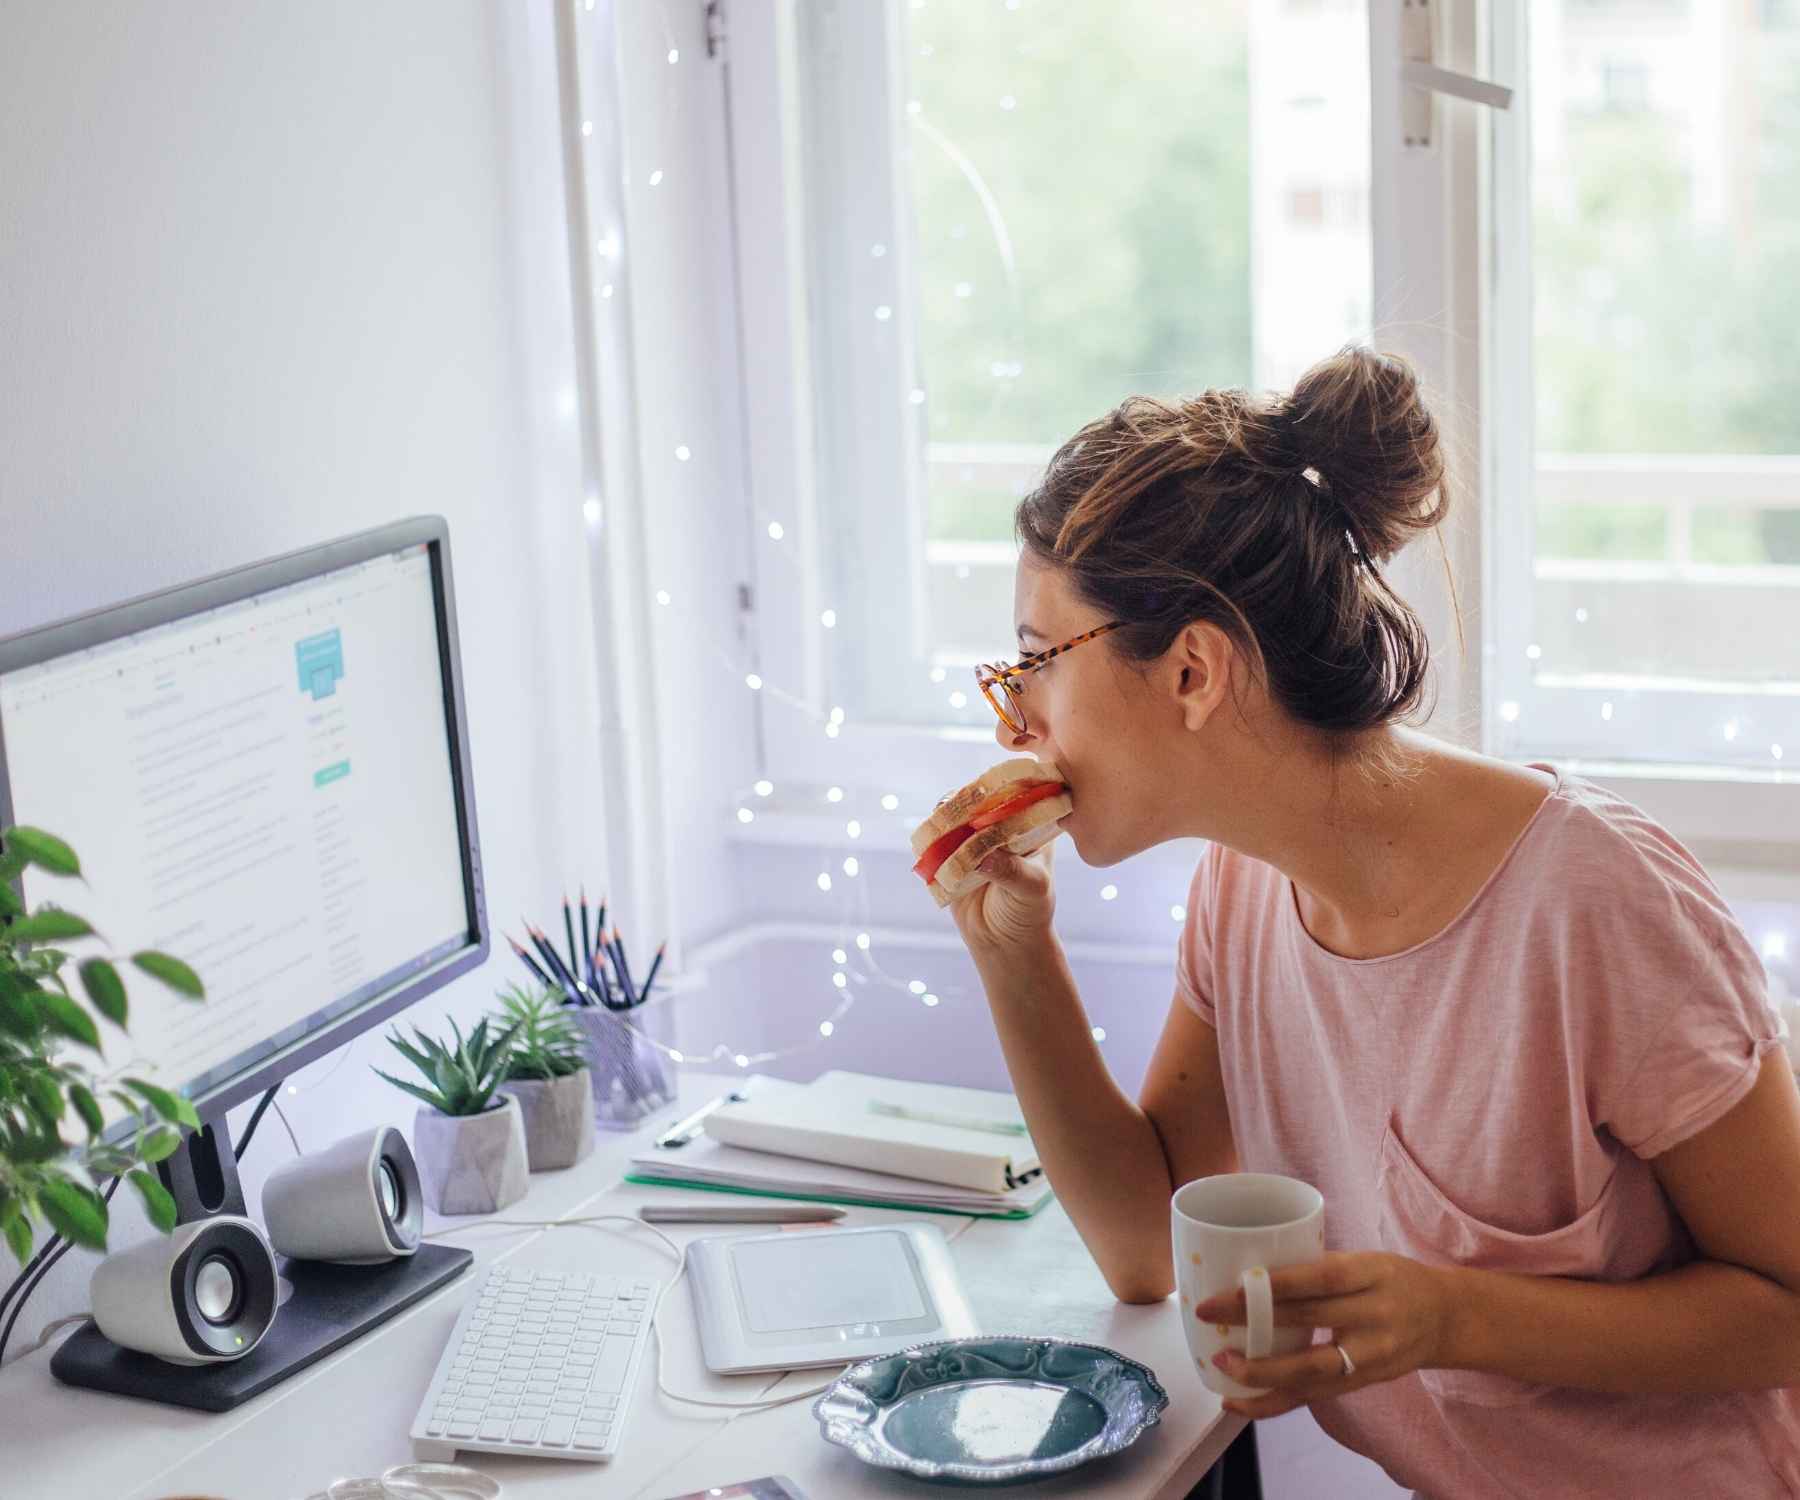 Woman eating toast at her desk in front of bright window